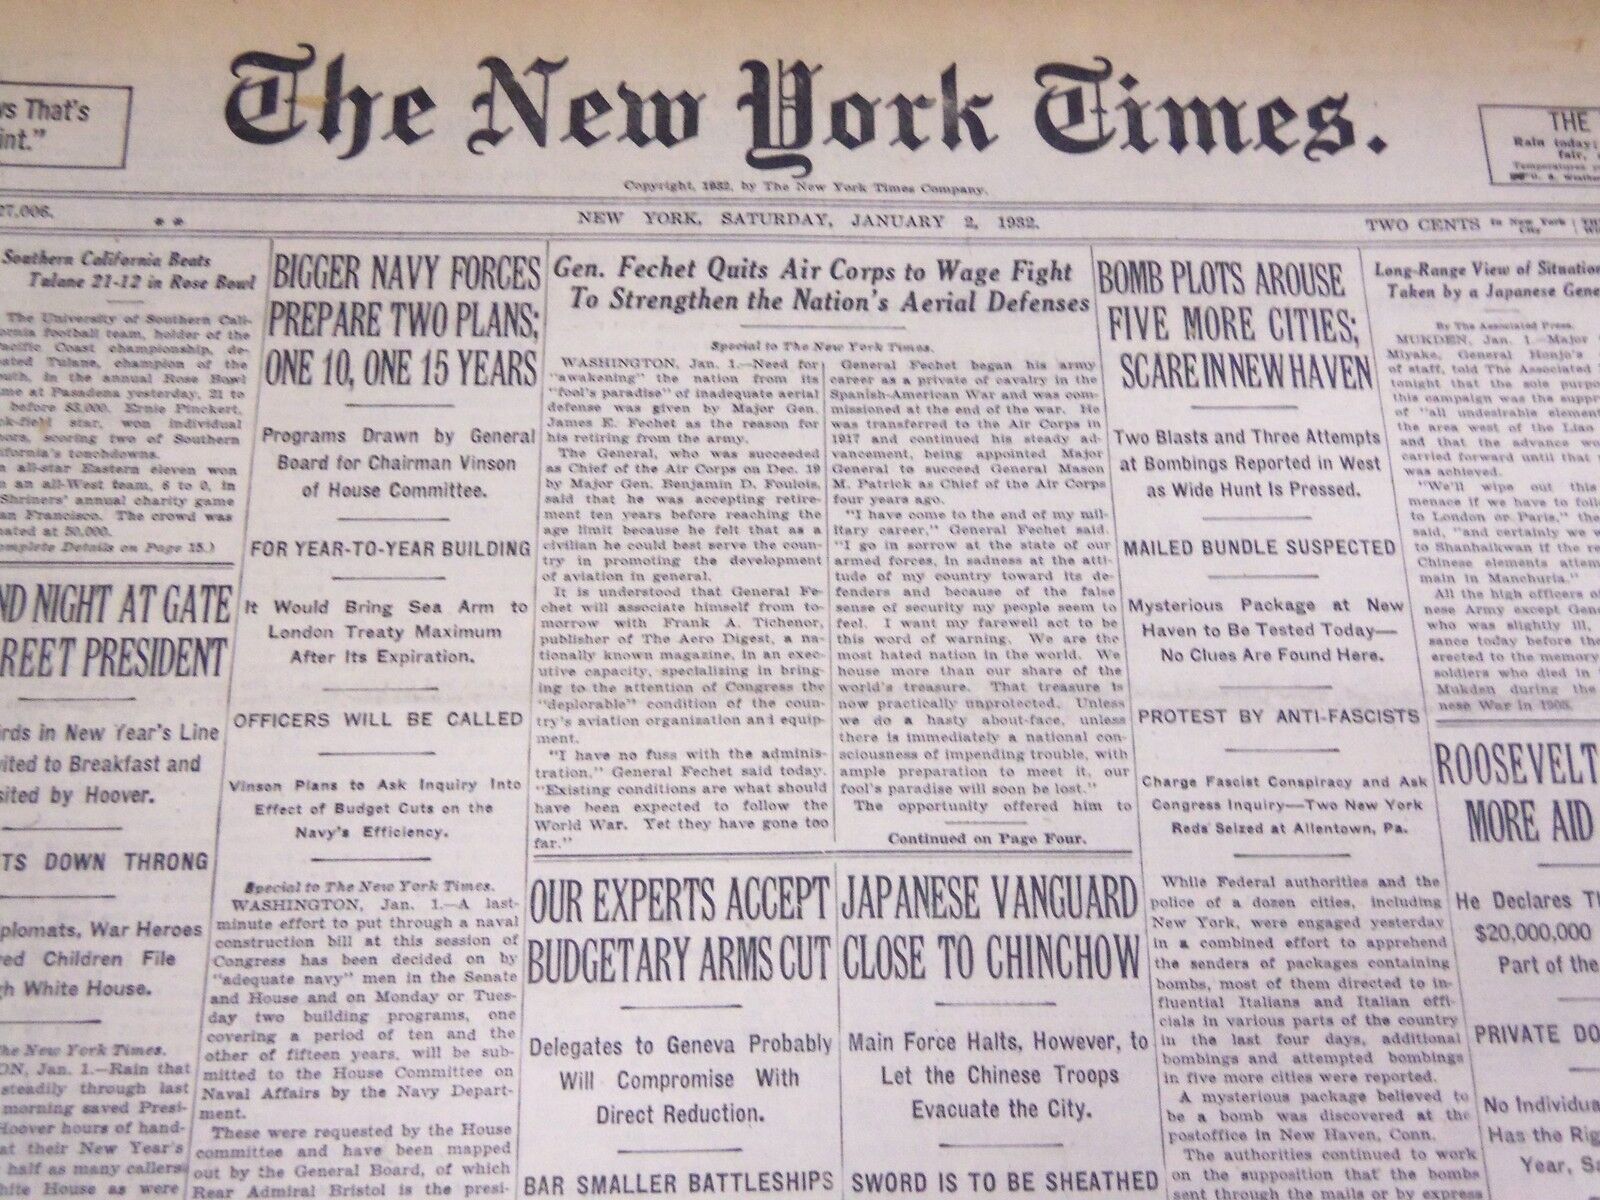 1932 JANUARY 2 NEW YORK TIMES - FECHET QUITS AIR CORPS - NT 4065